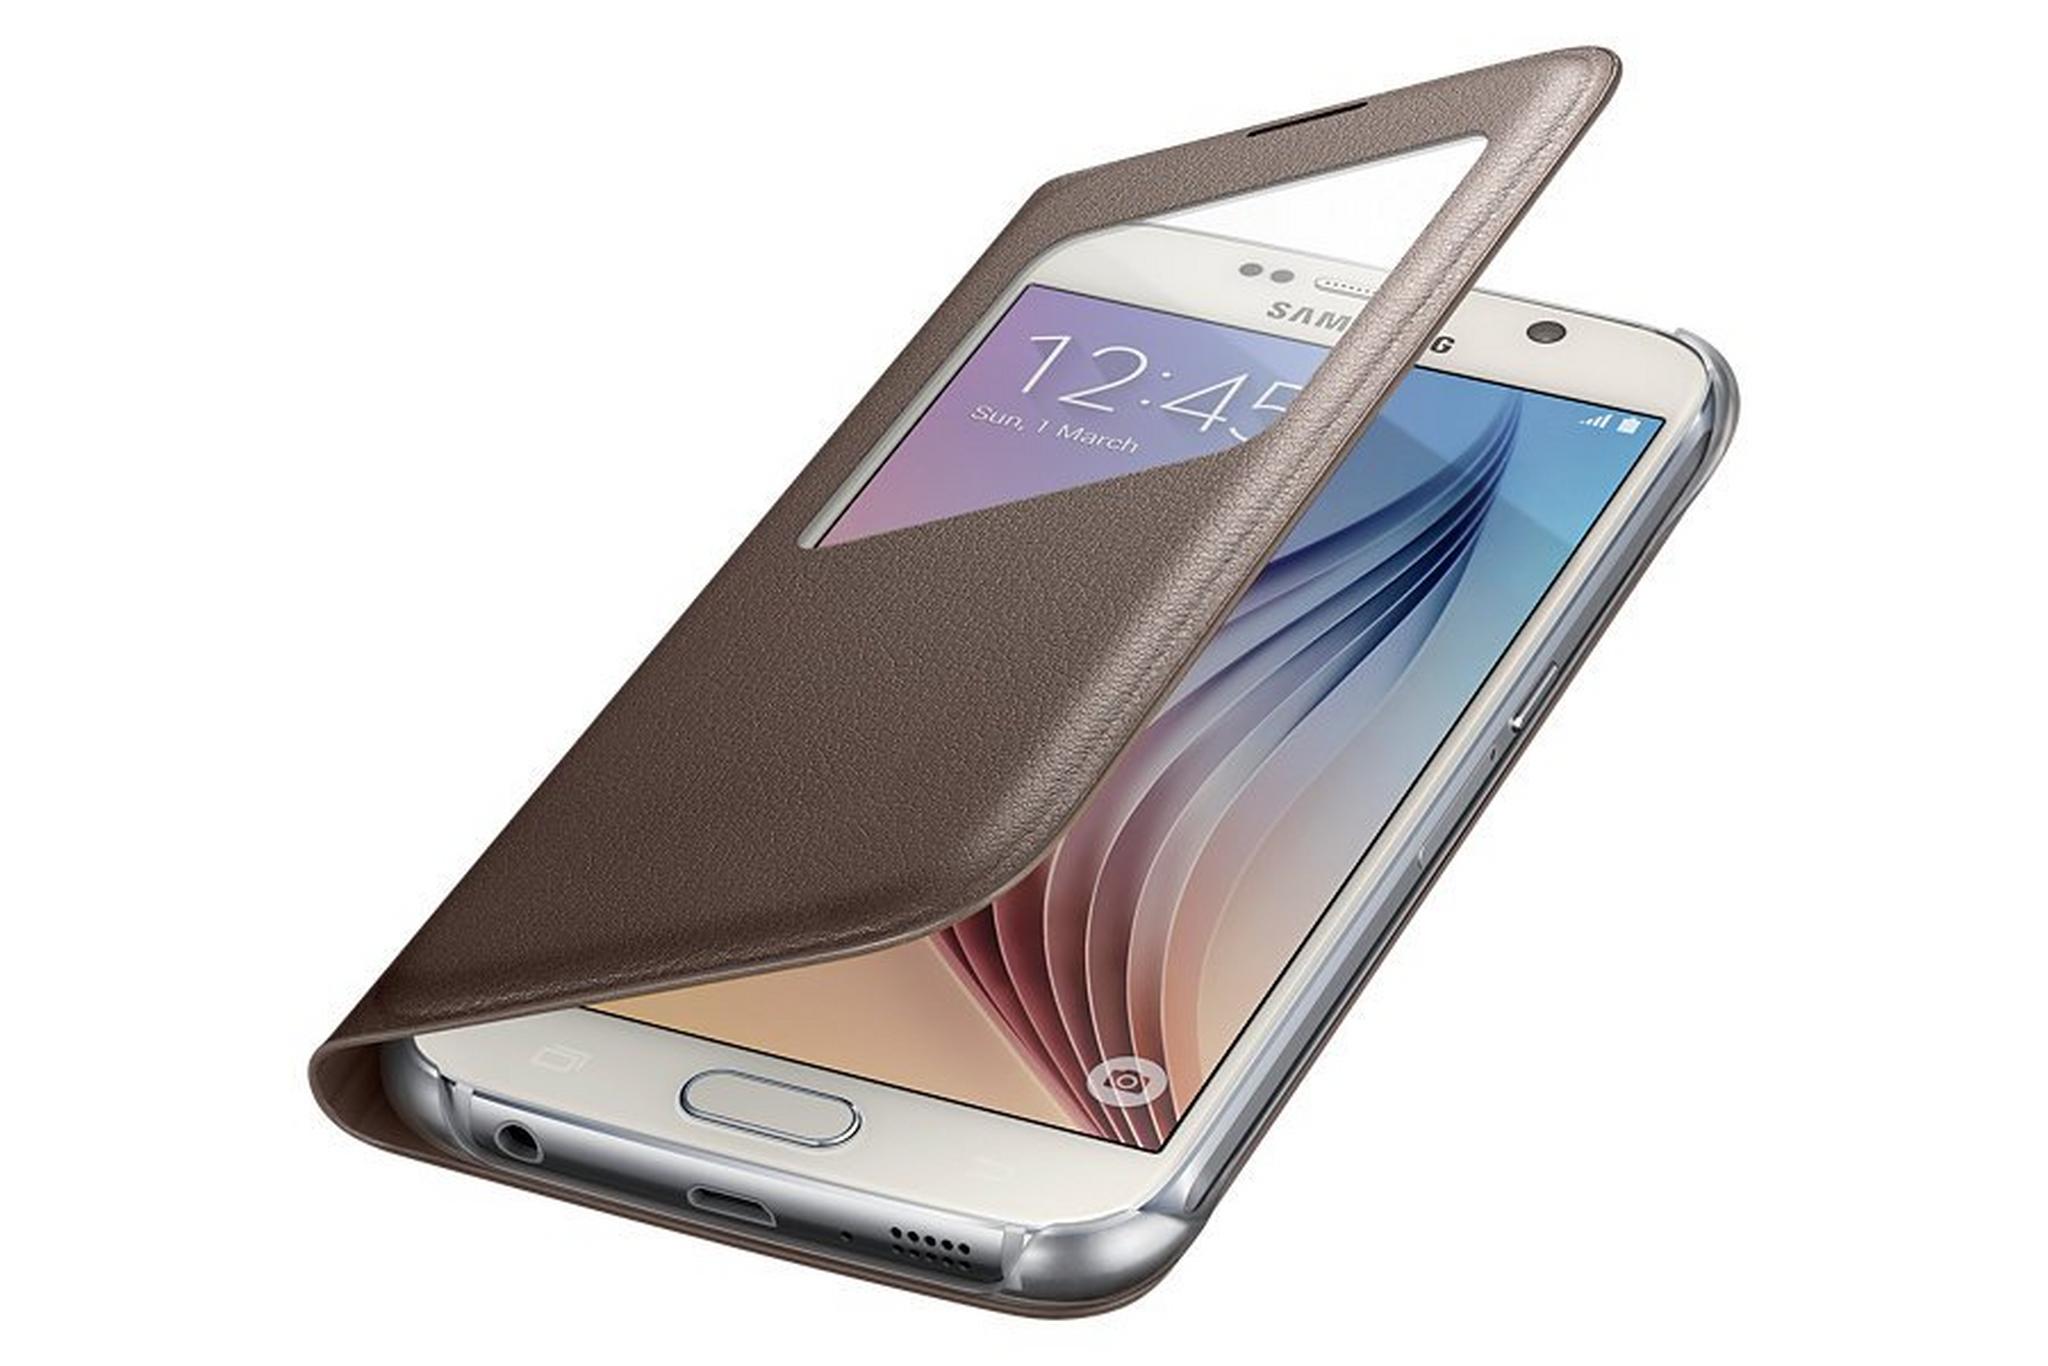 S View Cover for Galaxy S6 from Samsung - Gold